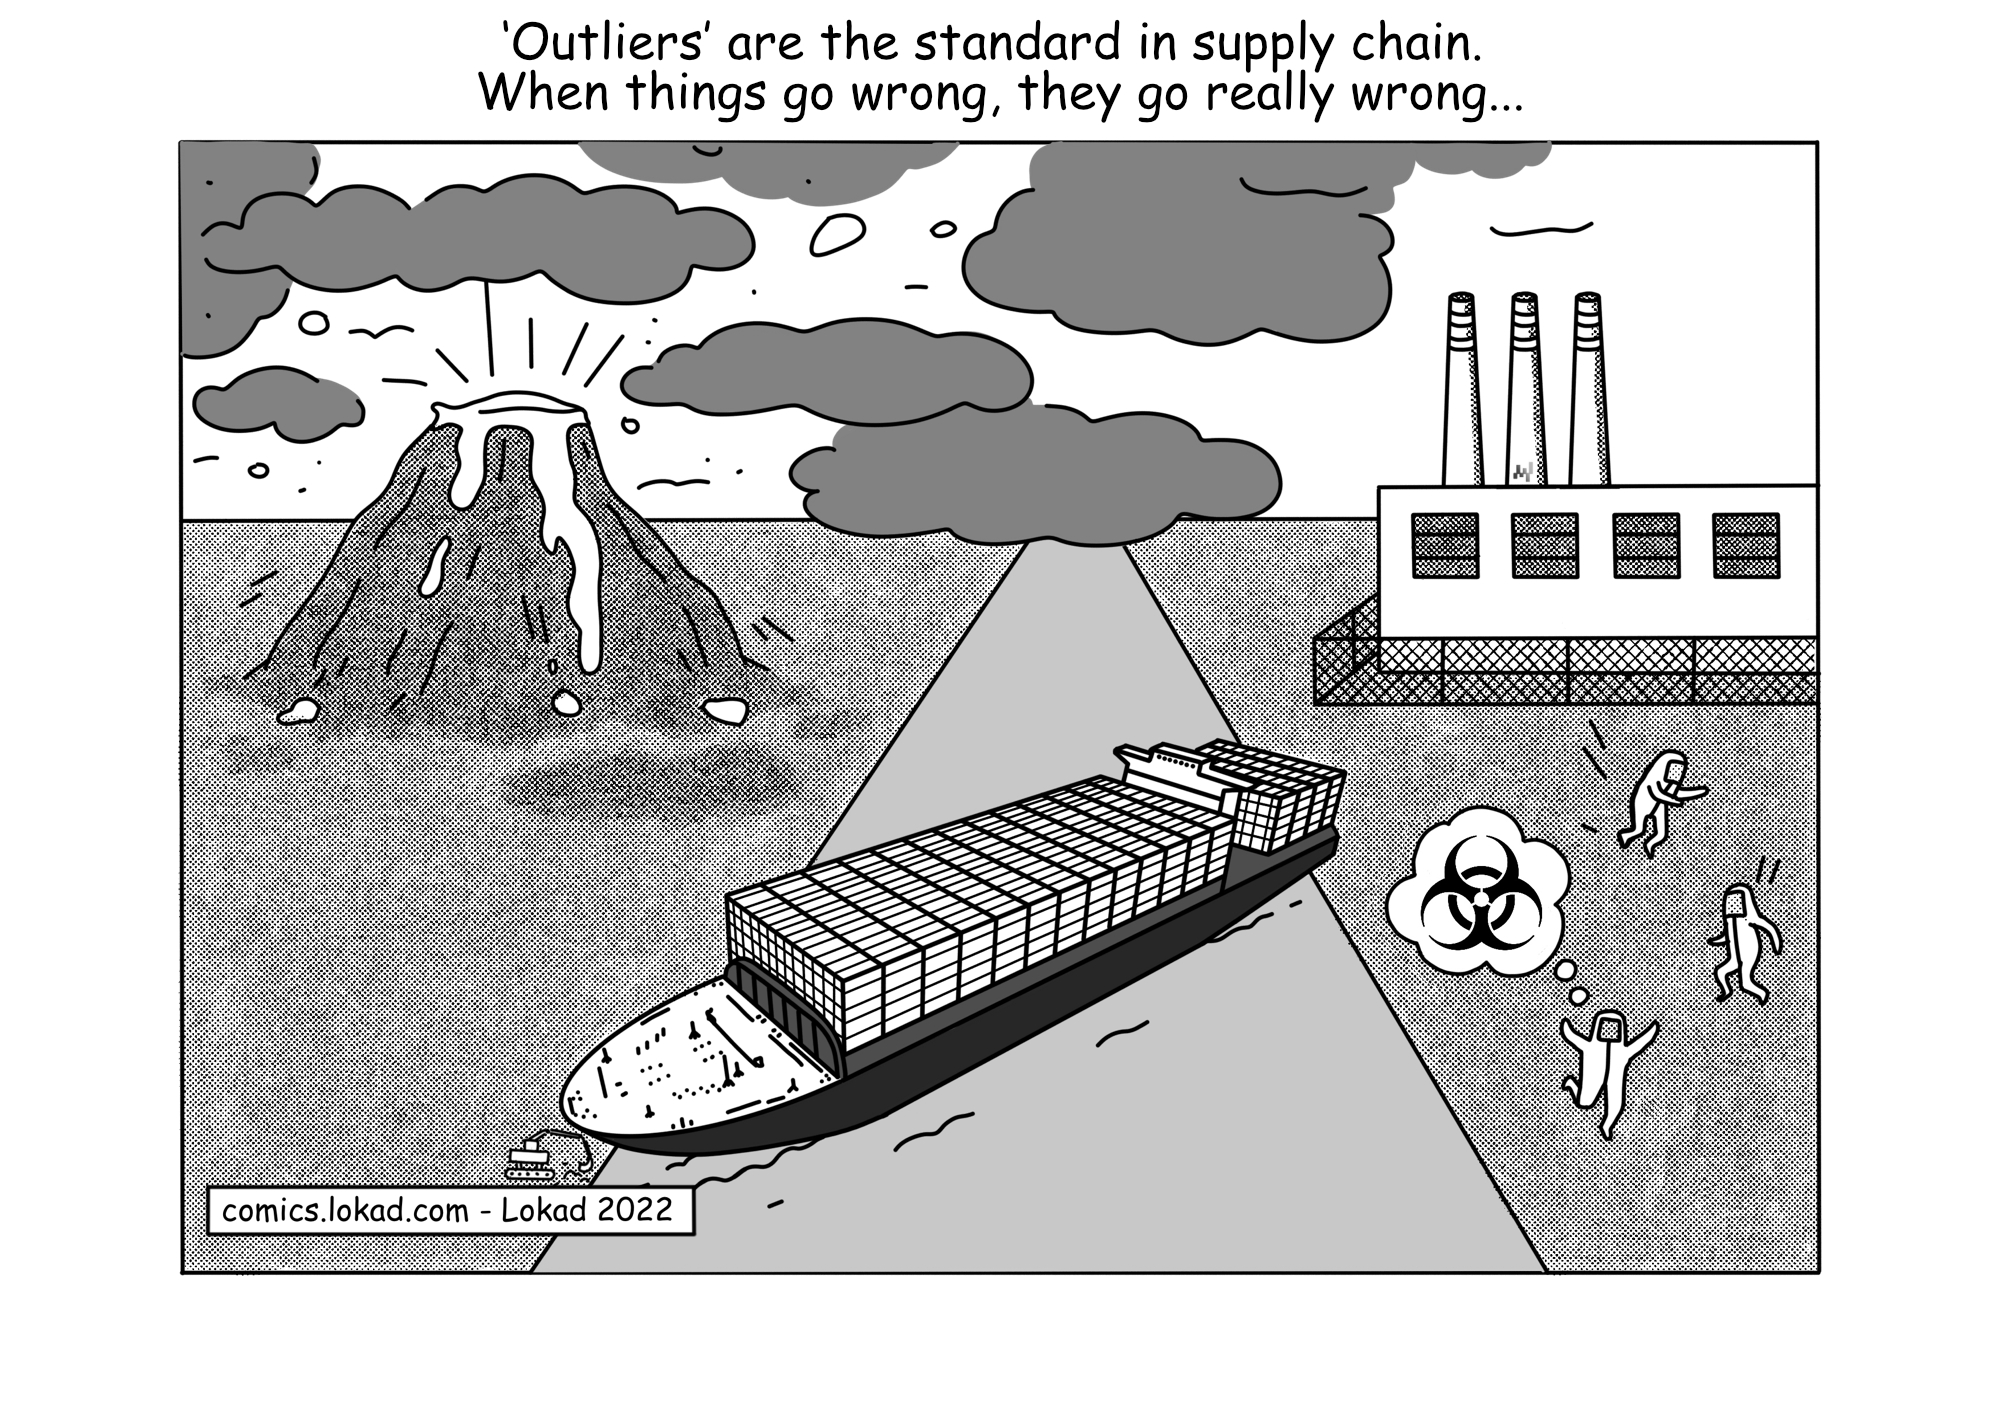 ‘Outliers' are the standard in Supply Chain. 'When things go wrong, they go really wrong...